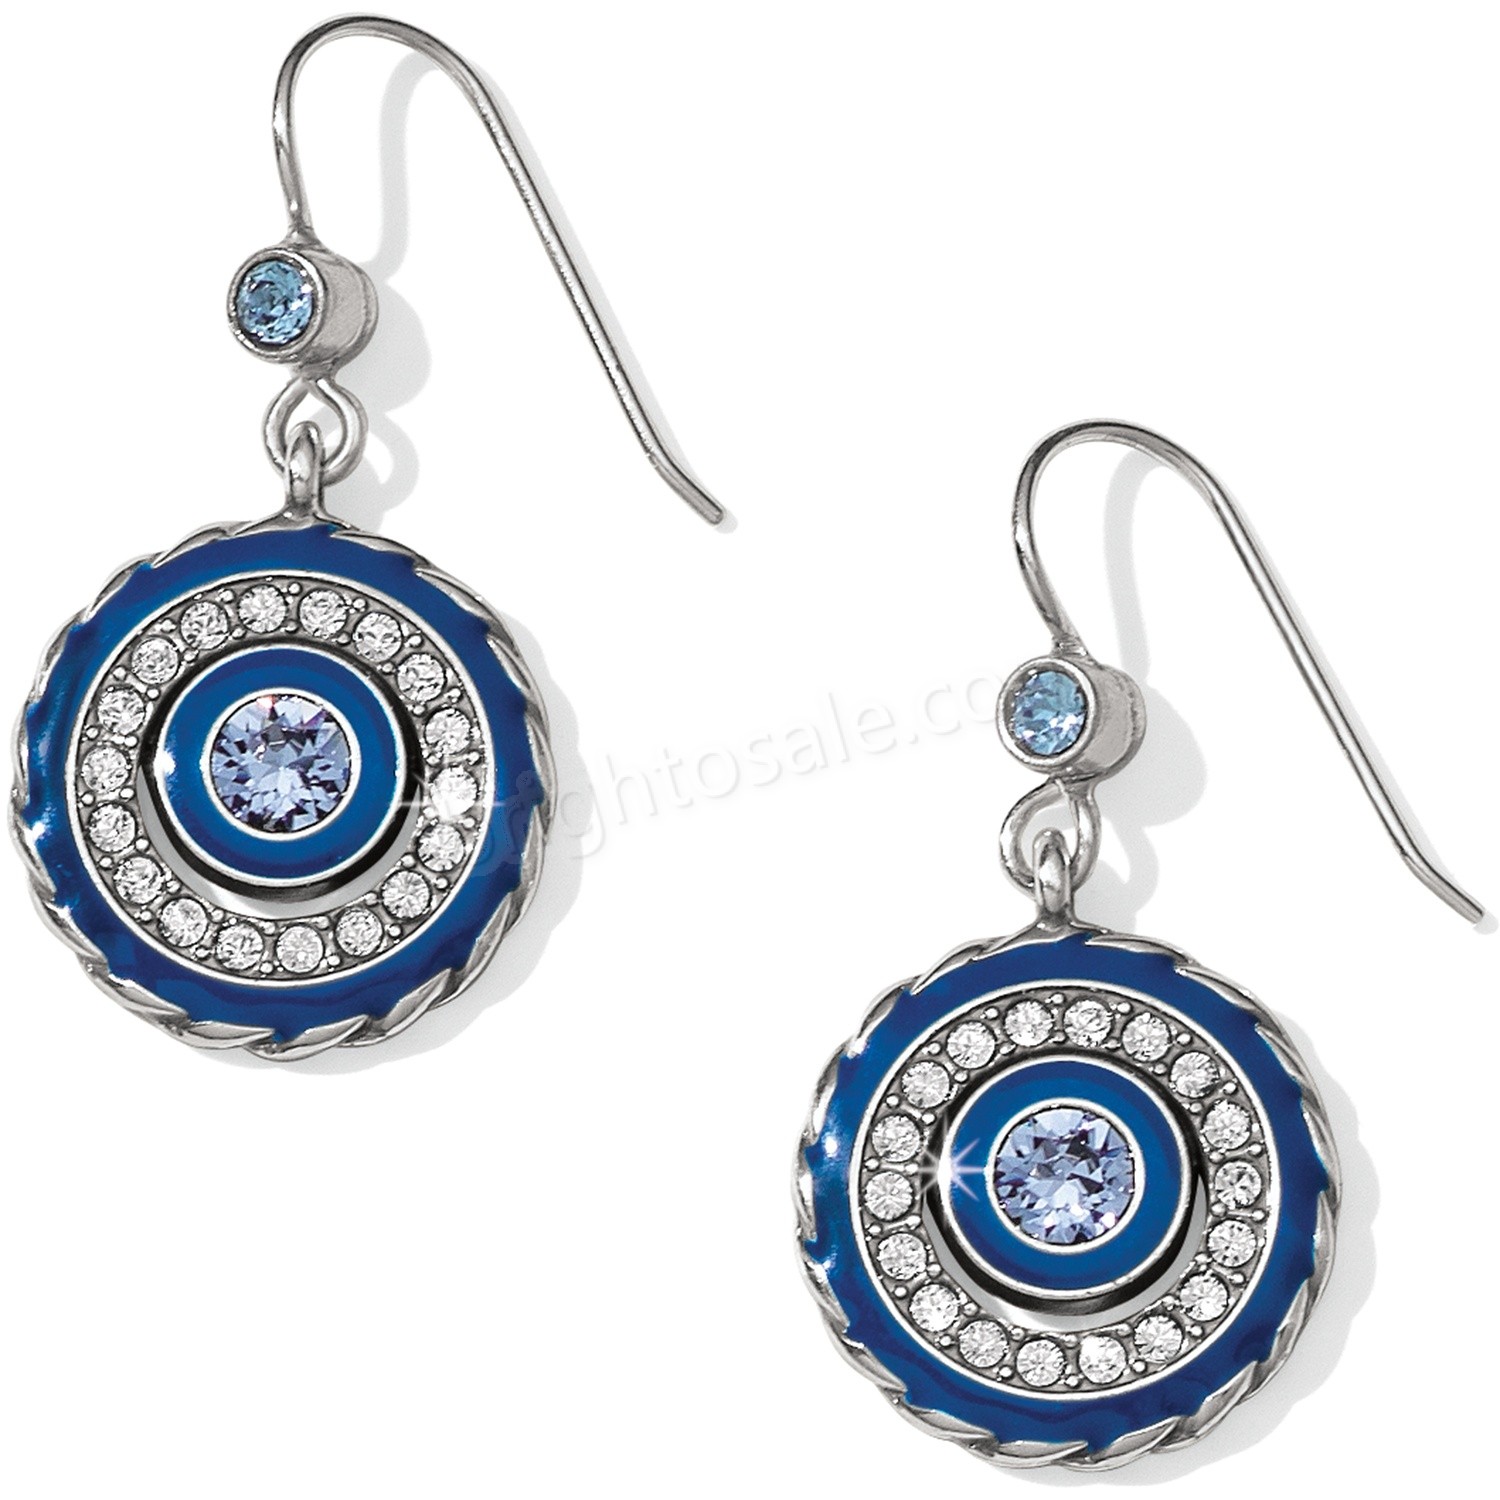 Brighton Collectibles & Online Discount Journey To India Petite French Wire Earrings - Brighton Collectibles & Online Discount Journey To India Petite French Wire Earrings